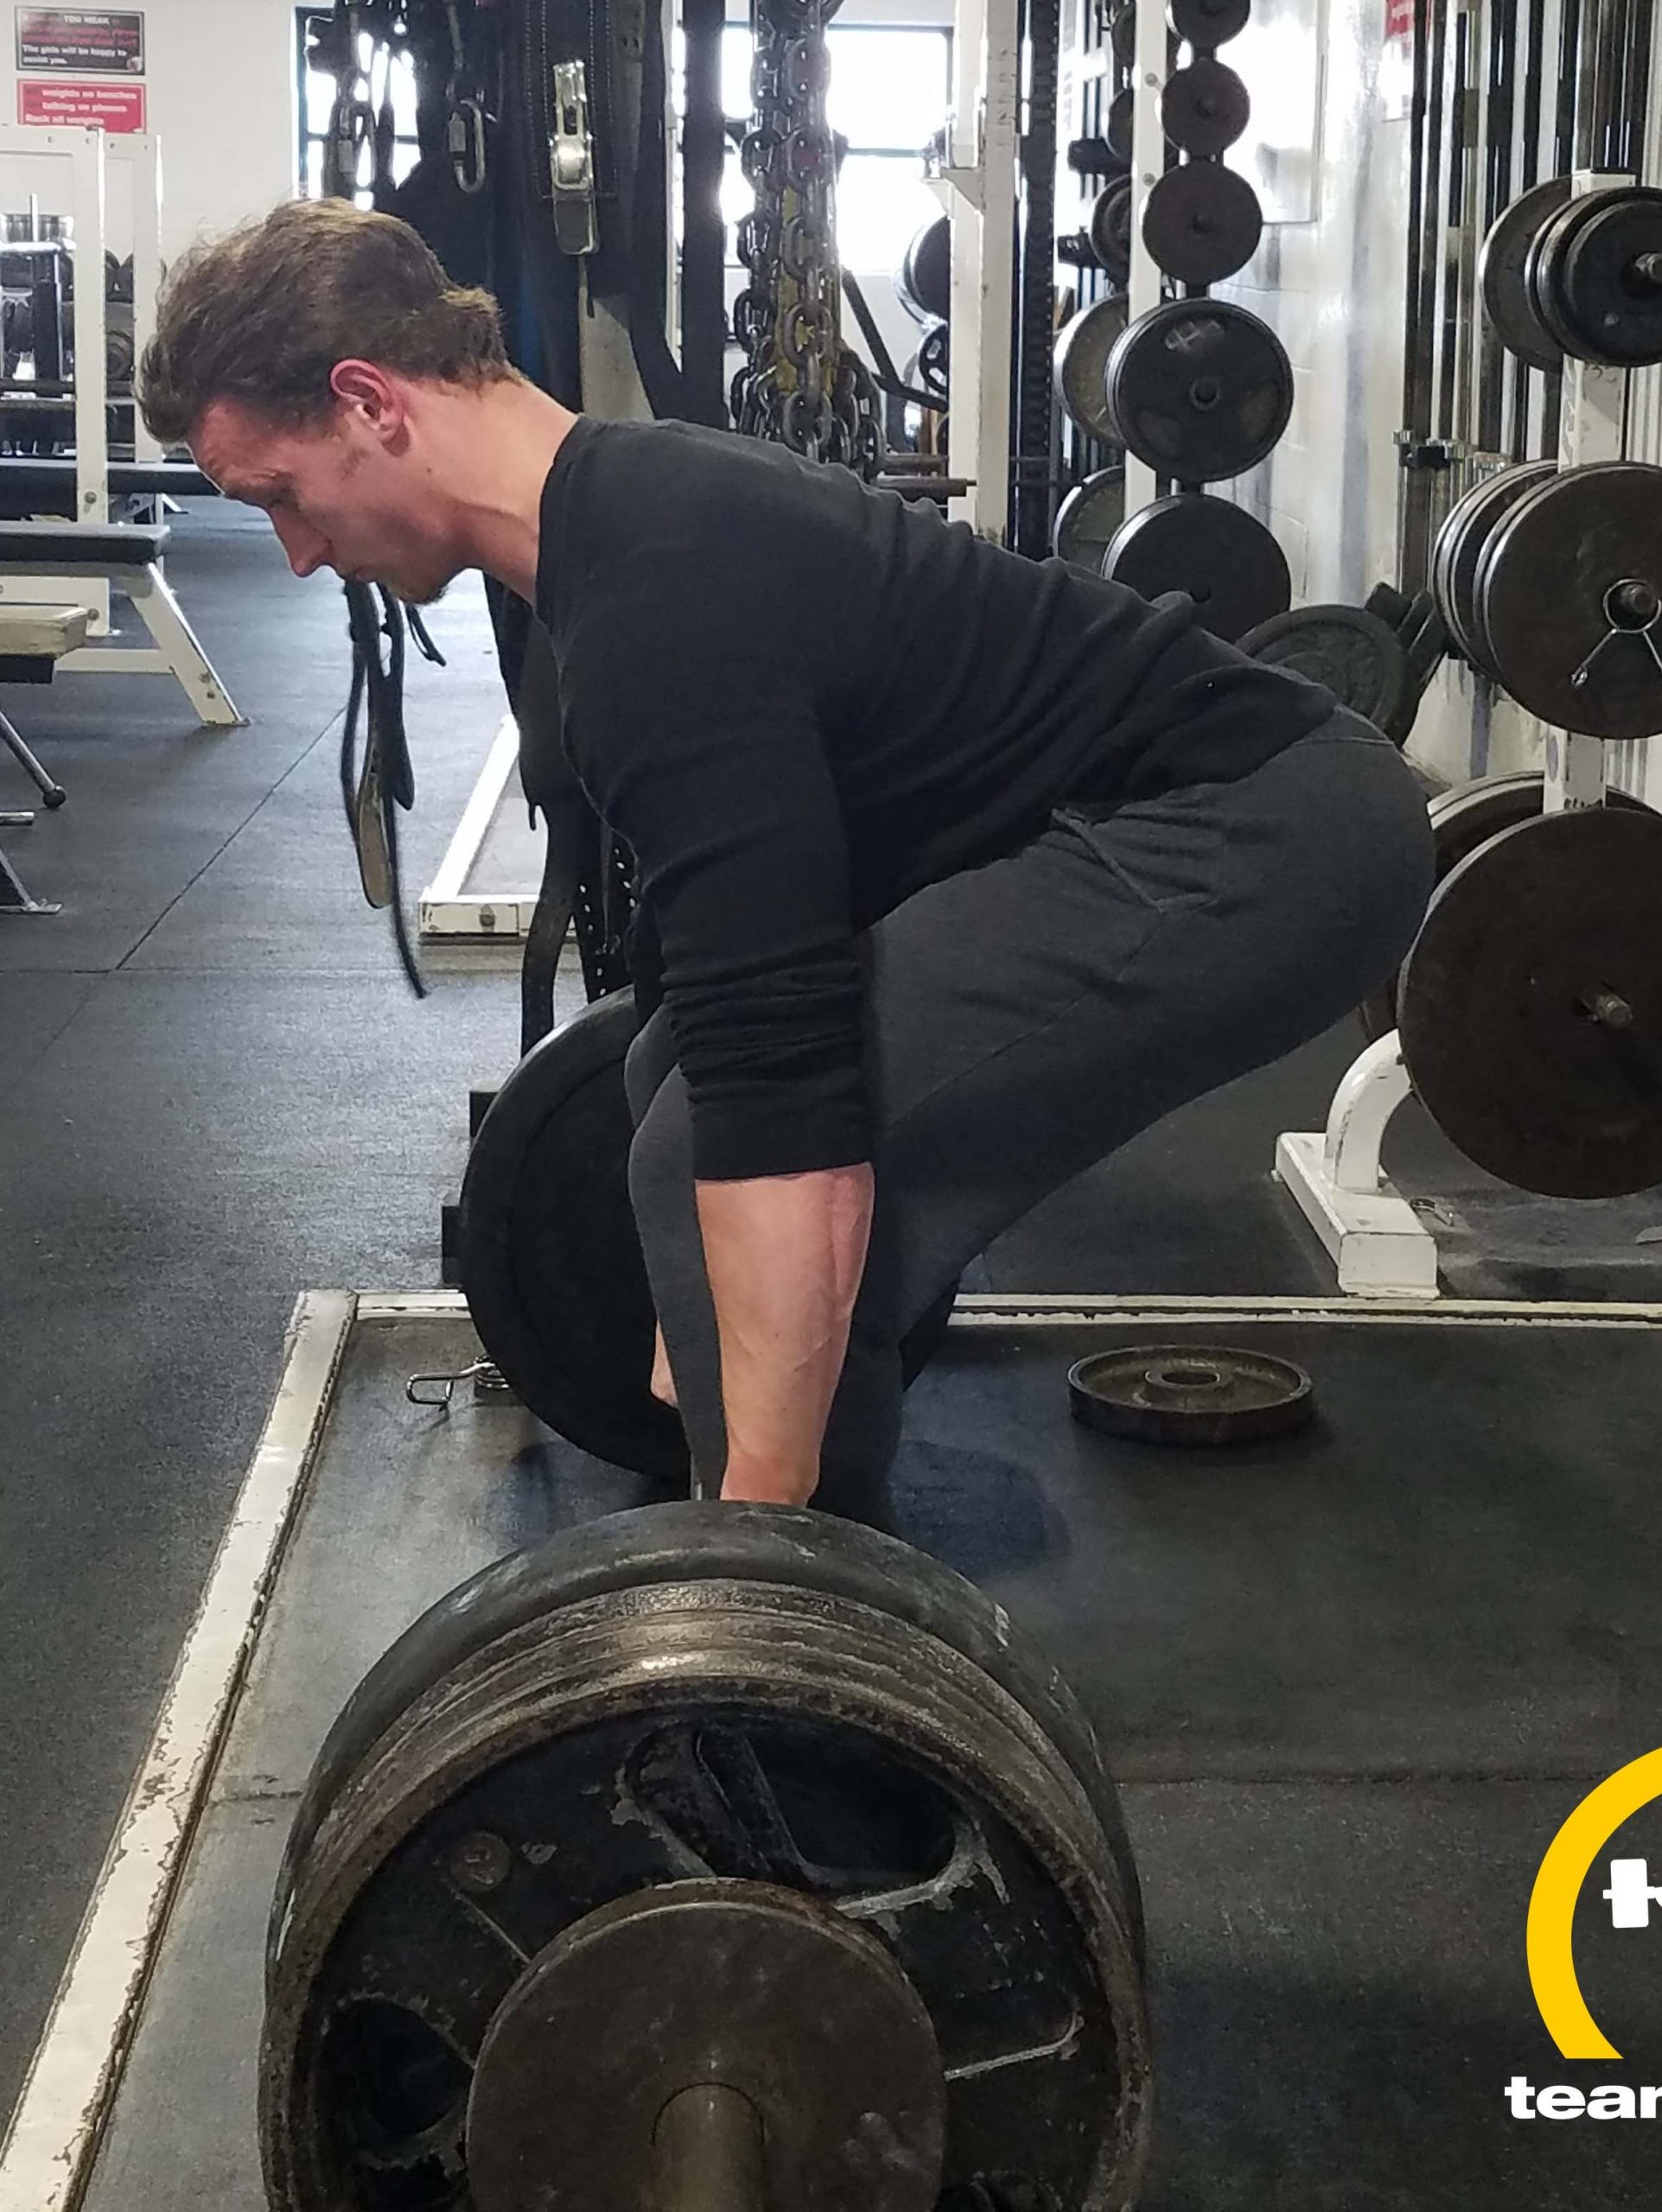 Sumo vs Conventional Deadlift: Which Should You Choose?